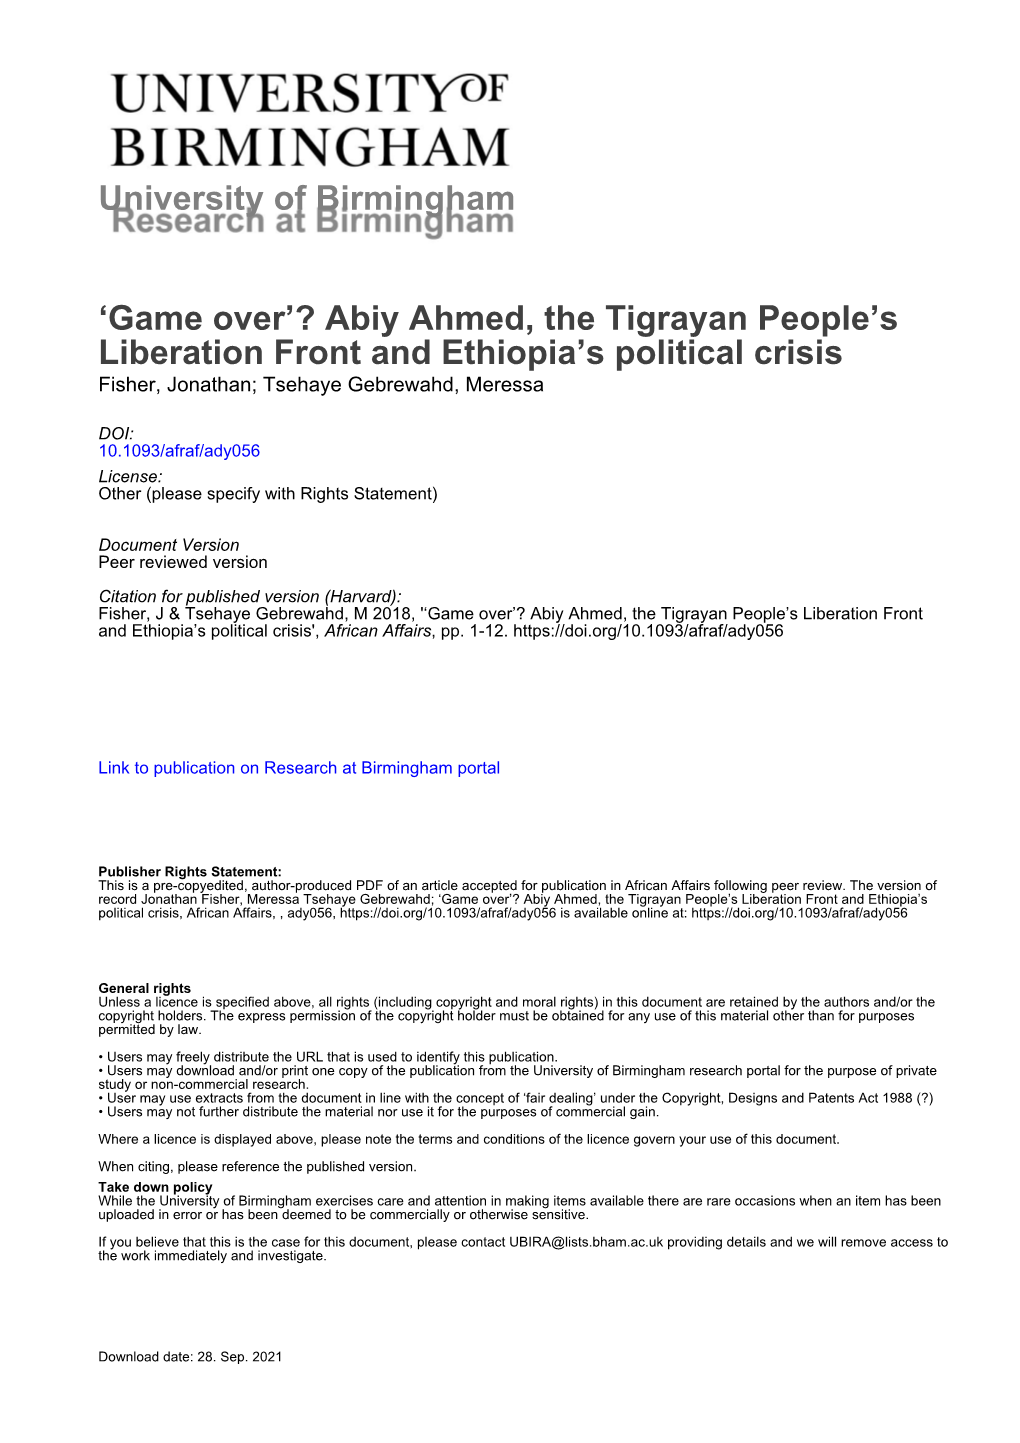 University of Birmingham 'Game Over'? Abiy Ahmed, The